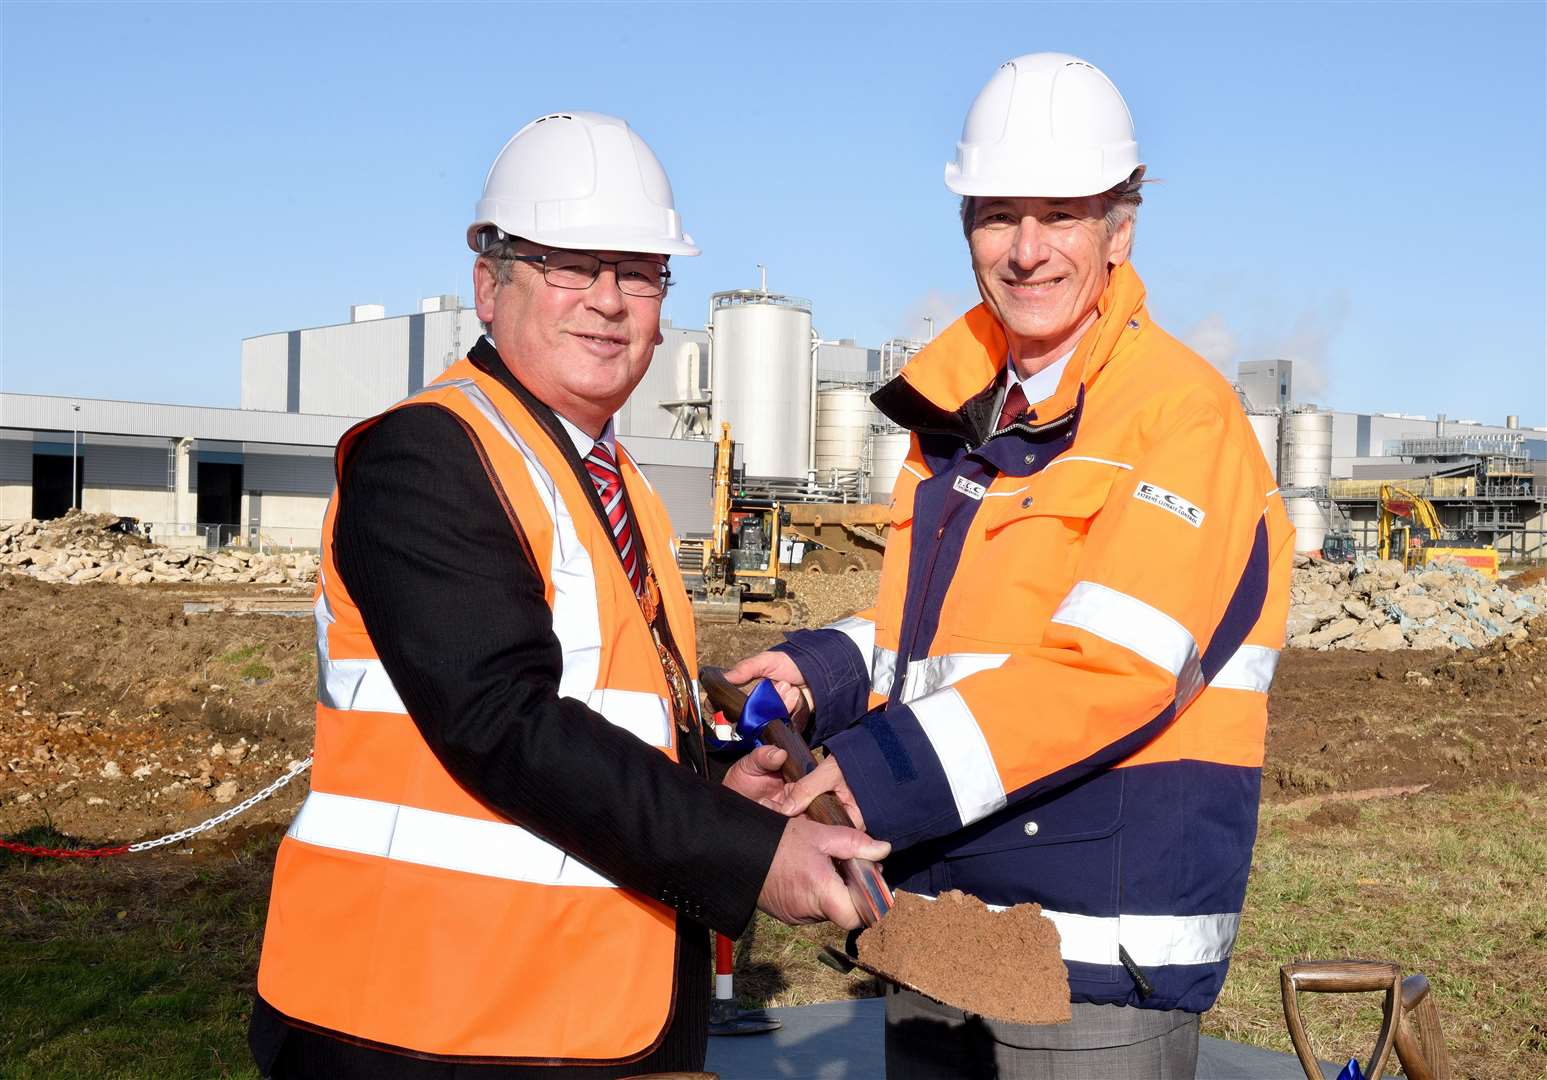 Borough Mayor Cllr Nick Daubney and Dr Wolfgang Palm (CEO Palm Paper) at a groundbreaking ceremony in November 2018